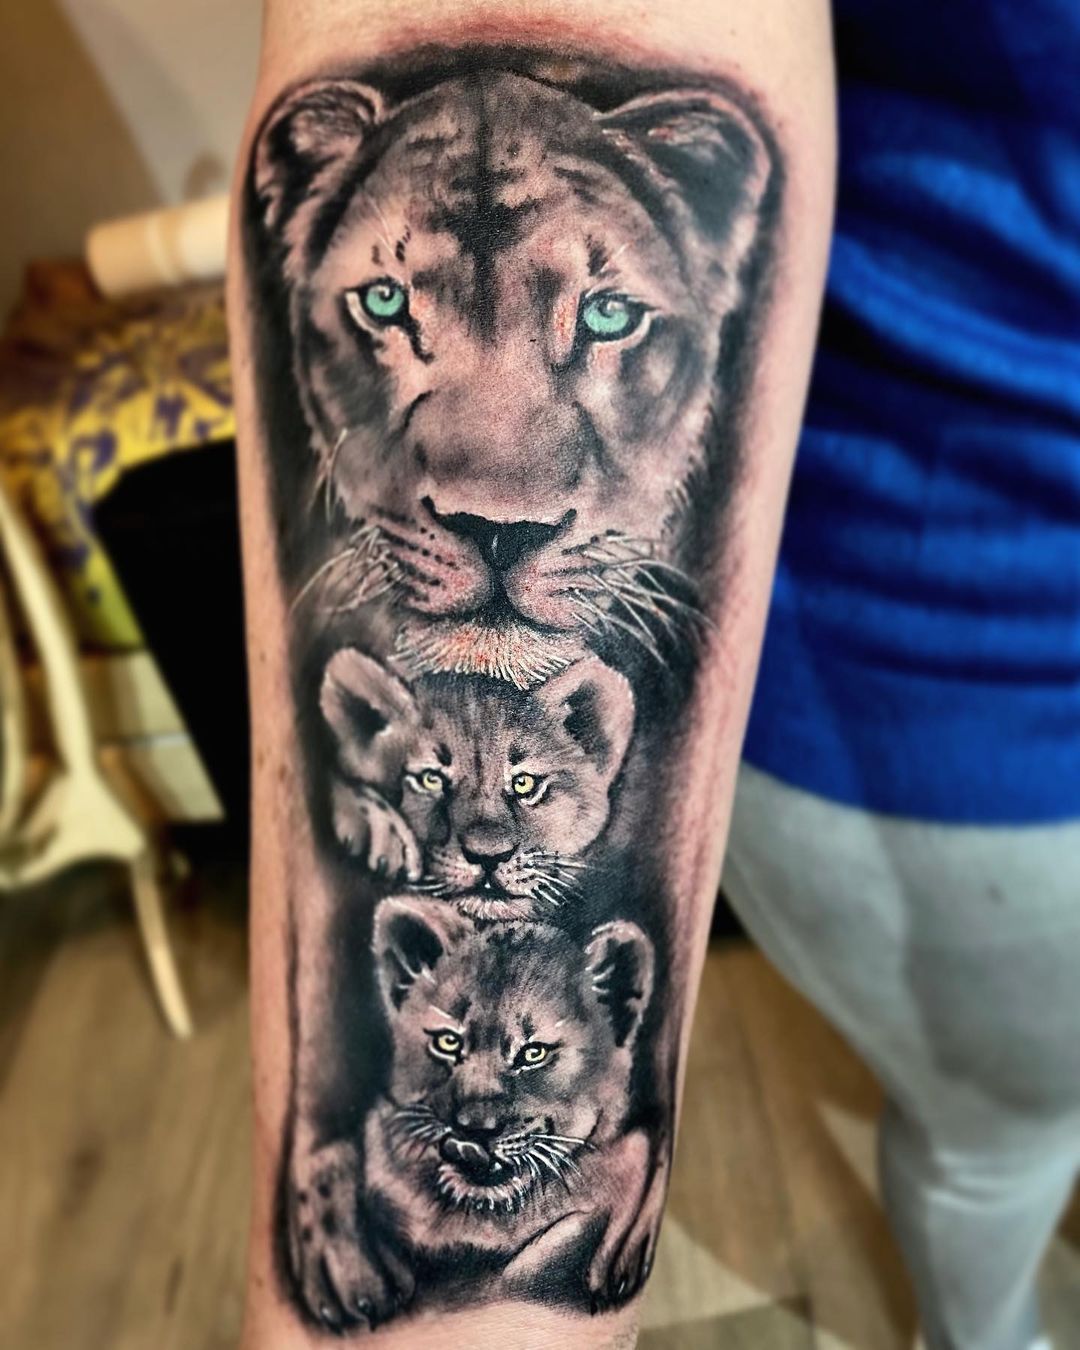 Joyzee Colorado on Instagram The Lion and cubs tattoo a representation  of a strong father and his children  Made this massive piece 3 days in  a row at Dthird Ink s